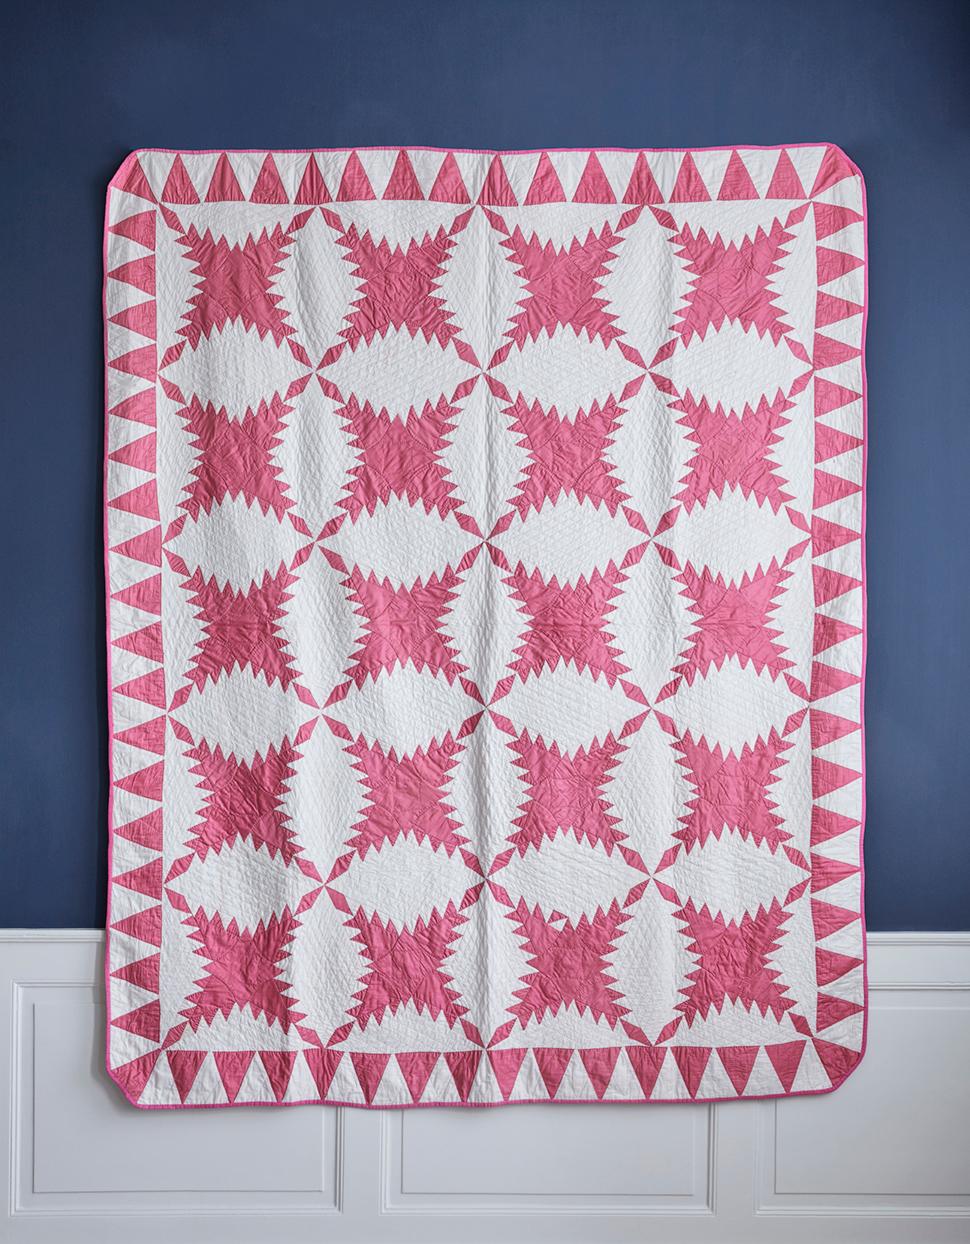 Lovely pink and white feathered stars cotton quilt. The quilt is hand pieced and hand quilted with a nice pyramid border.